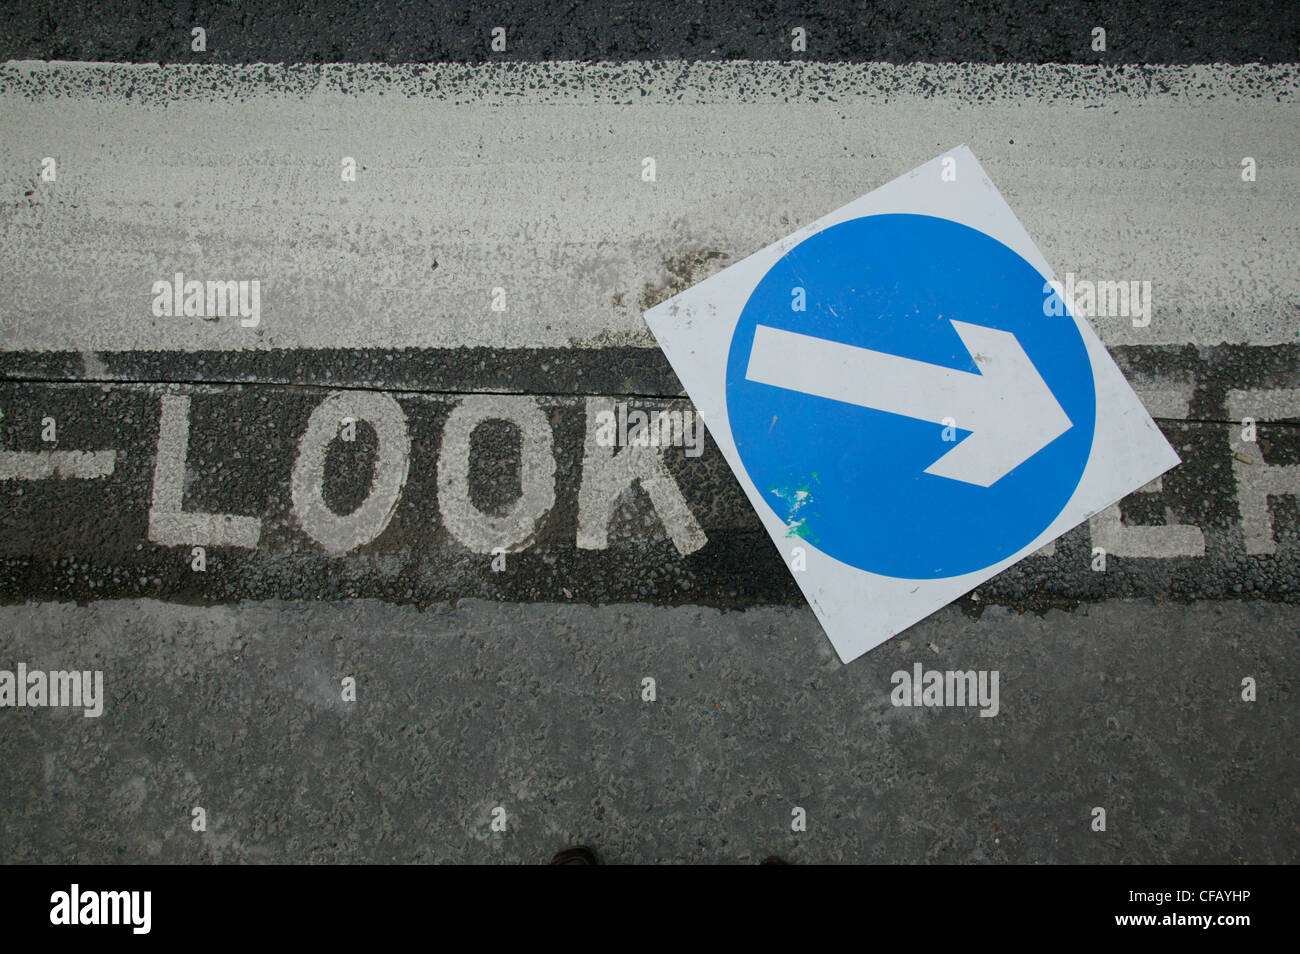 A blue sign on the road surface covering a 'look left' instruction painted on the road, London. Stock Photo